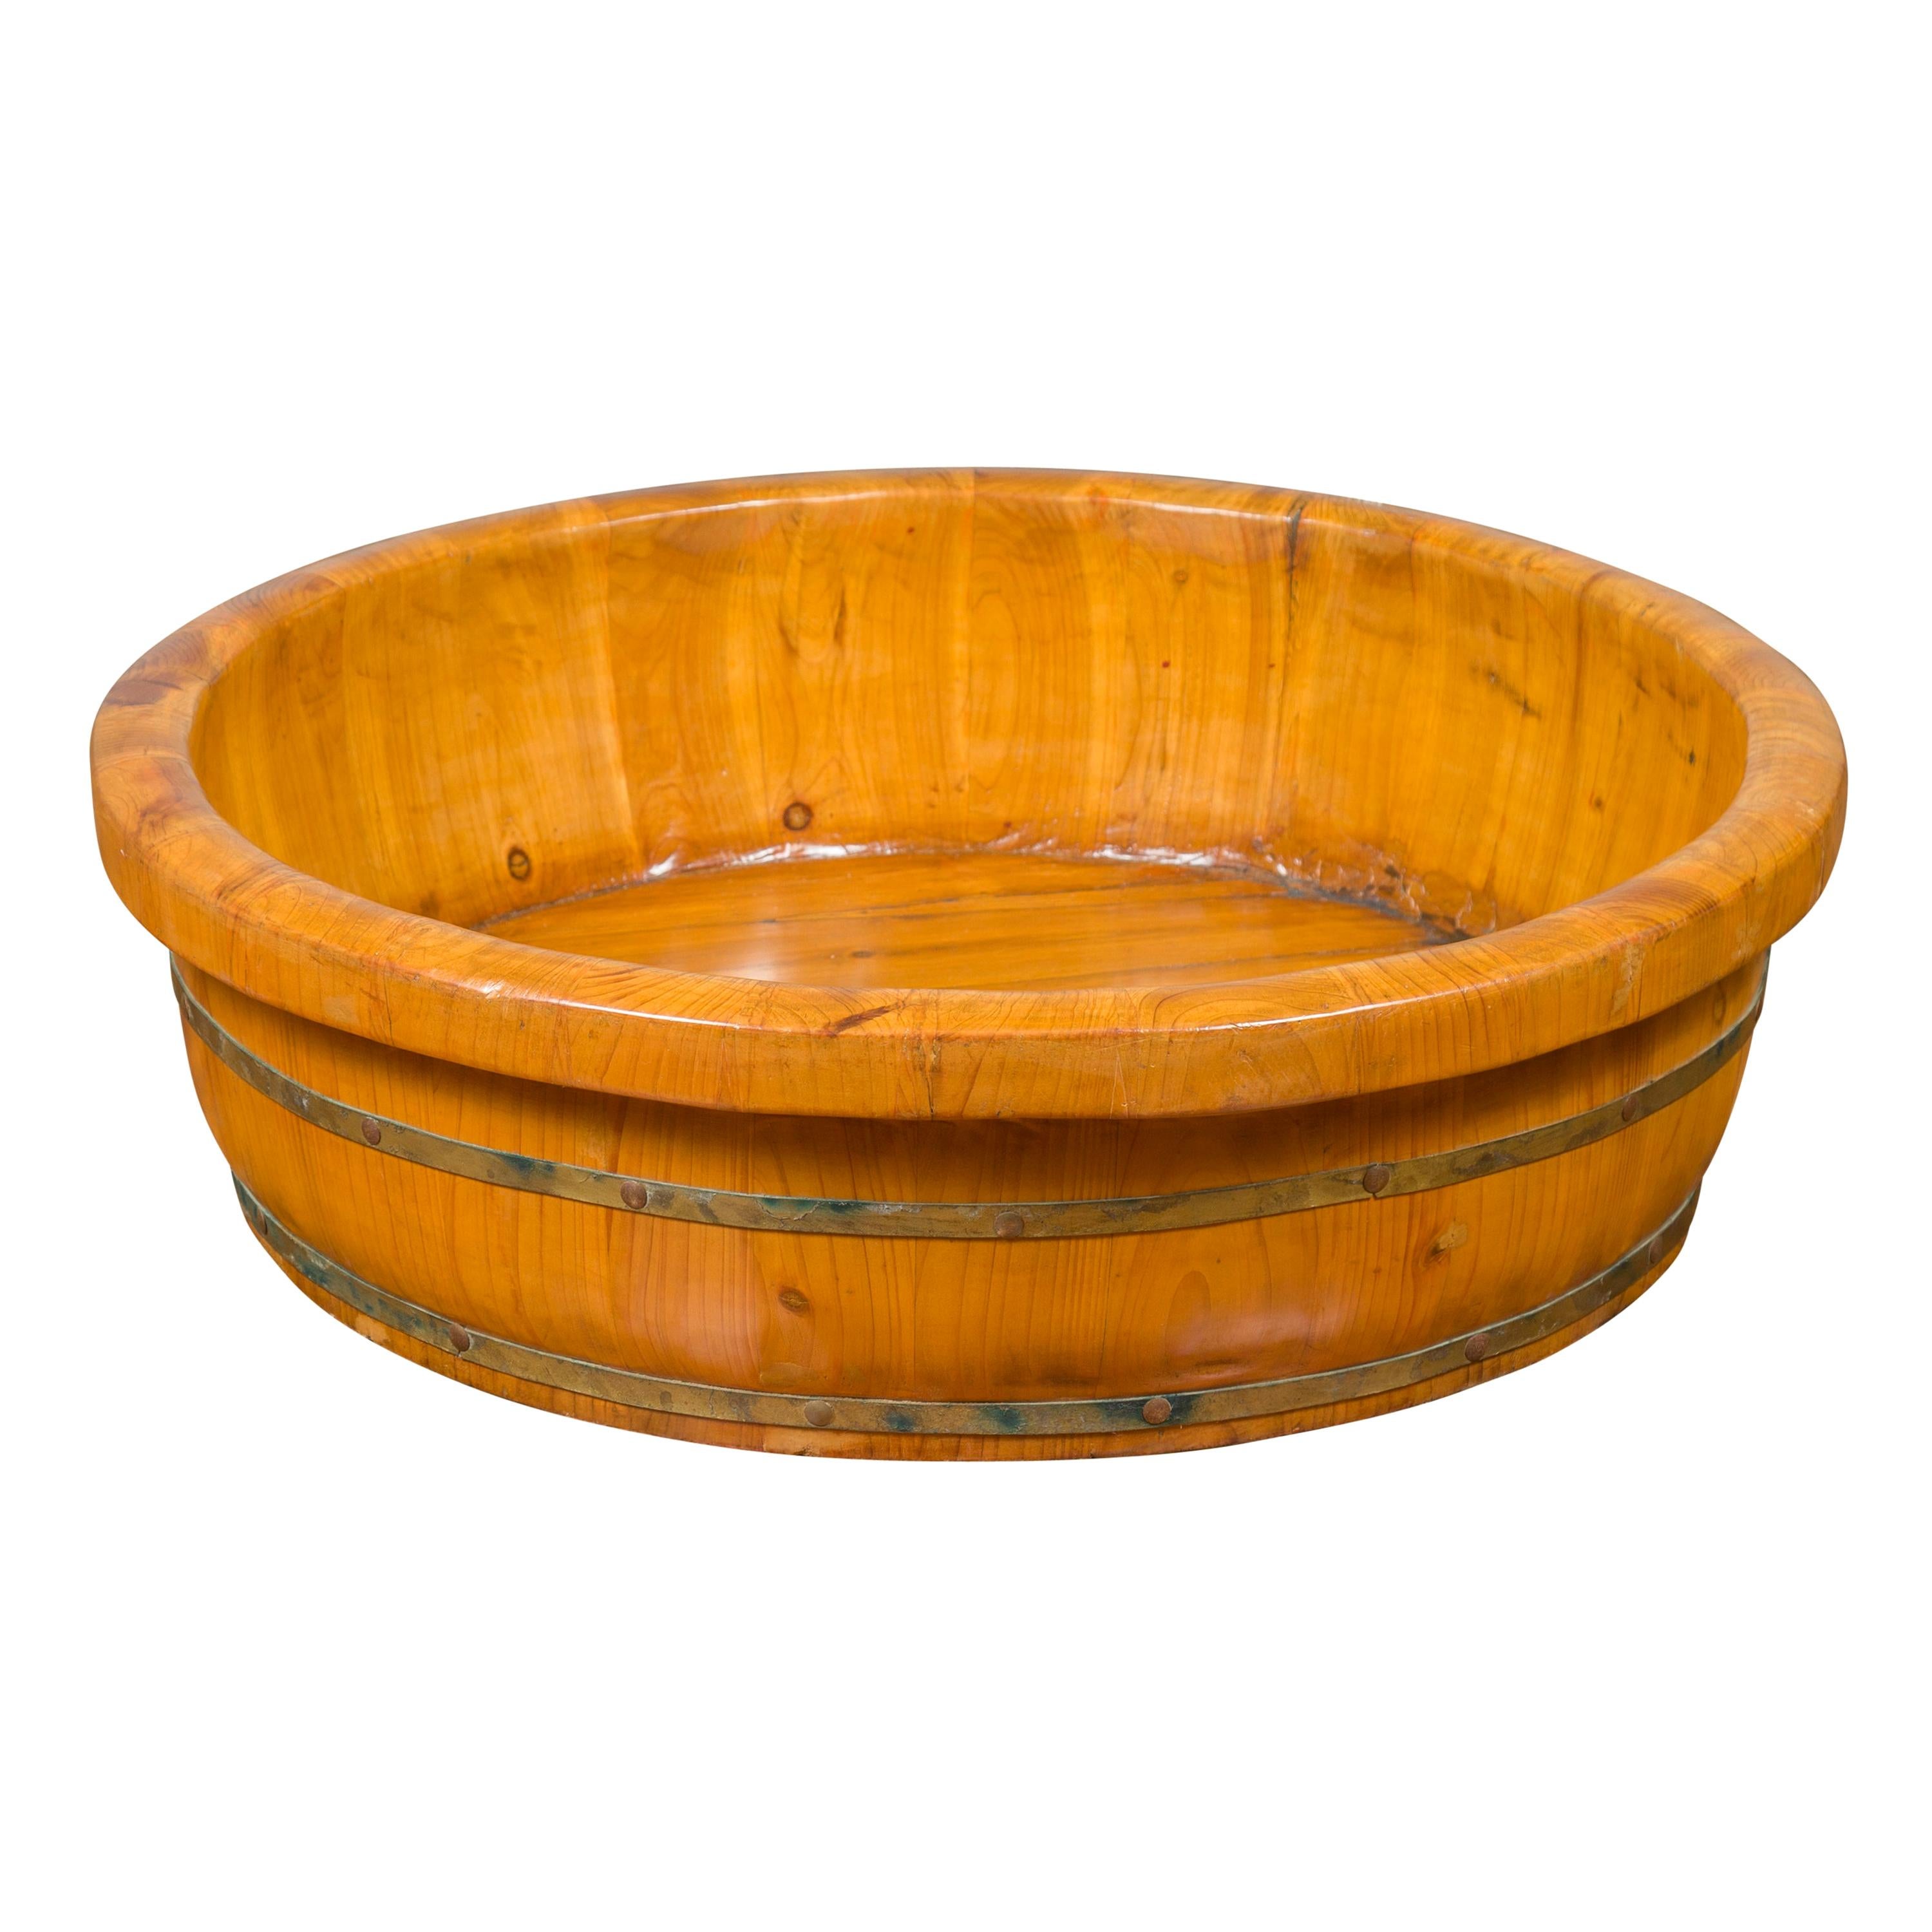 Qing Dynasty Period 19th Century Elm Round Rice Tray with Brass Braces